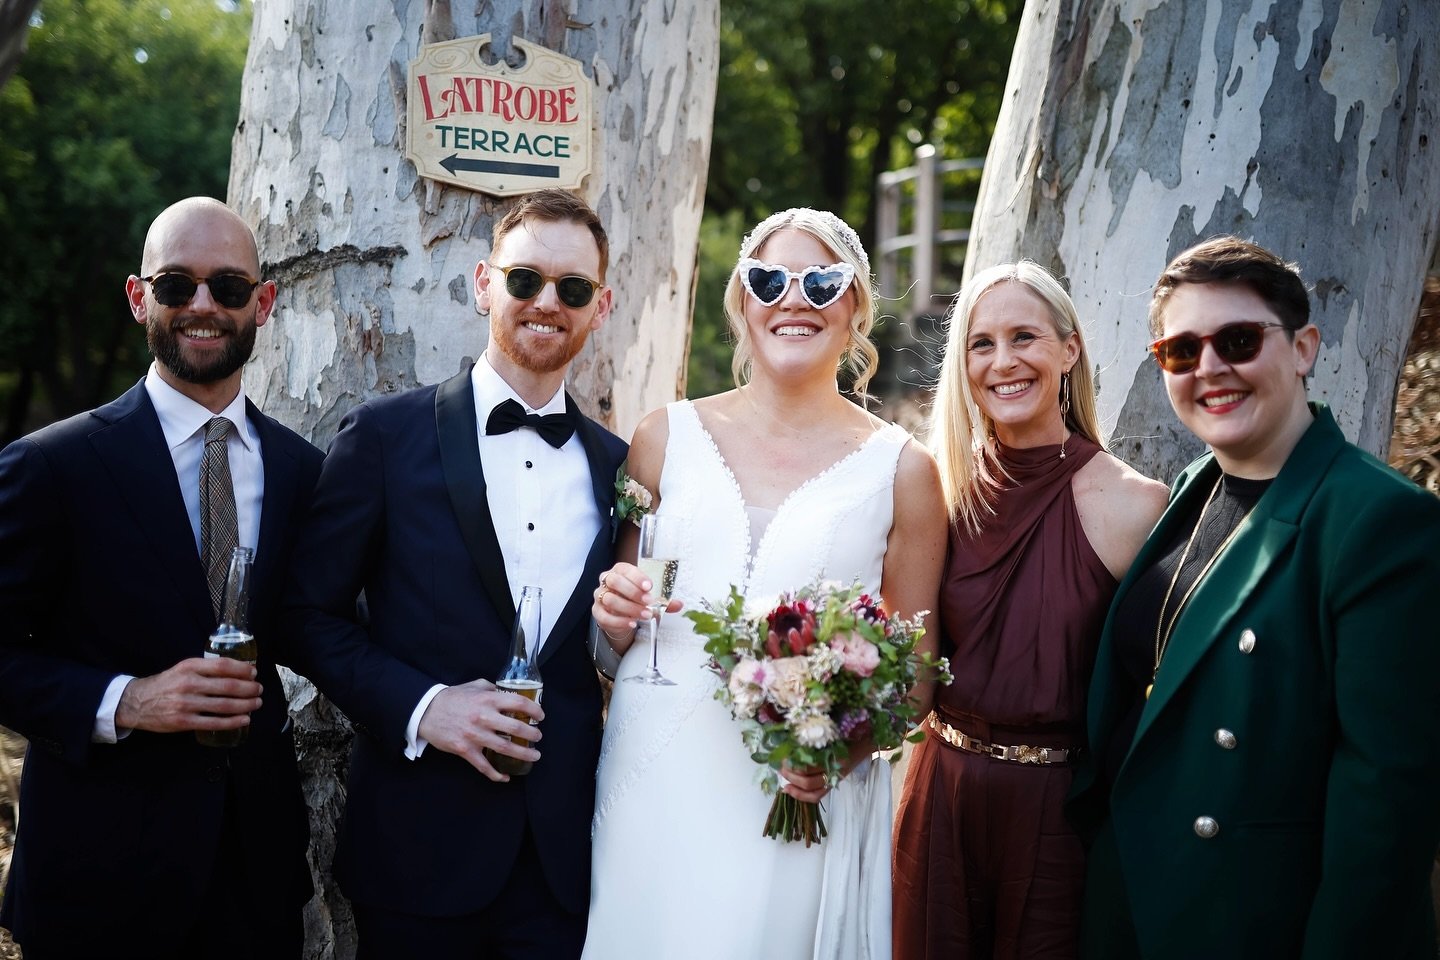 Signing your marriage certificates after your ceremony has such a relaxed feel! Sunnies on, drinks flowing, laughs and good times happening all while you finish off that last legal step&hellip; signing your marriage certificates.
.
That&rsquo;s exact